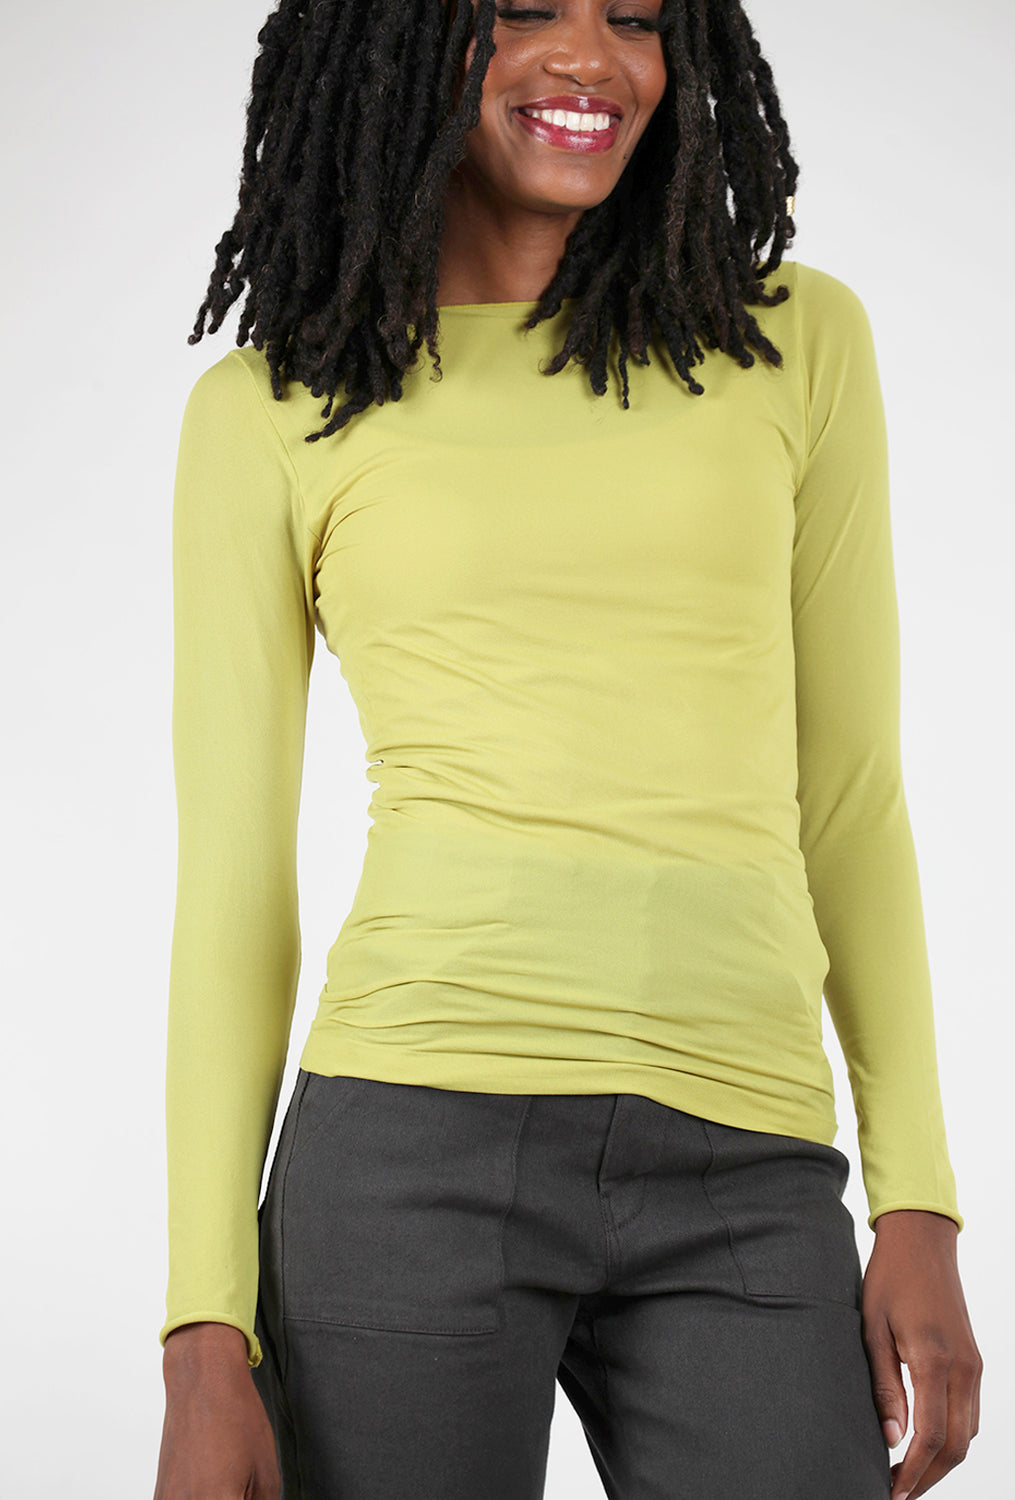 AMB Designs Raw Edge Solid Second Skin Top, Golden Lime 